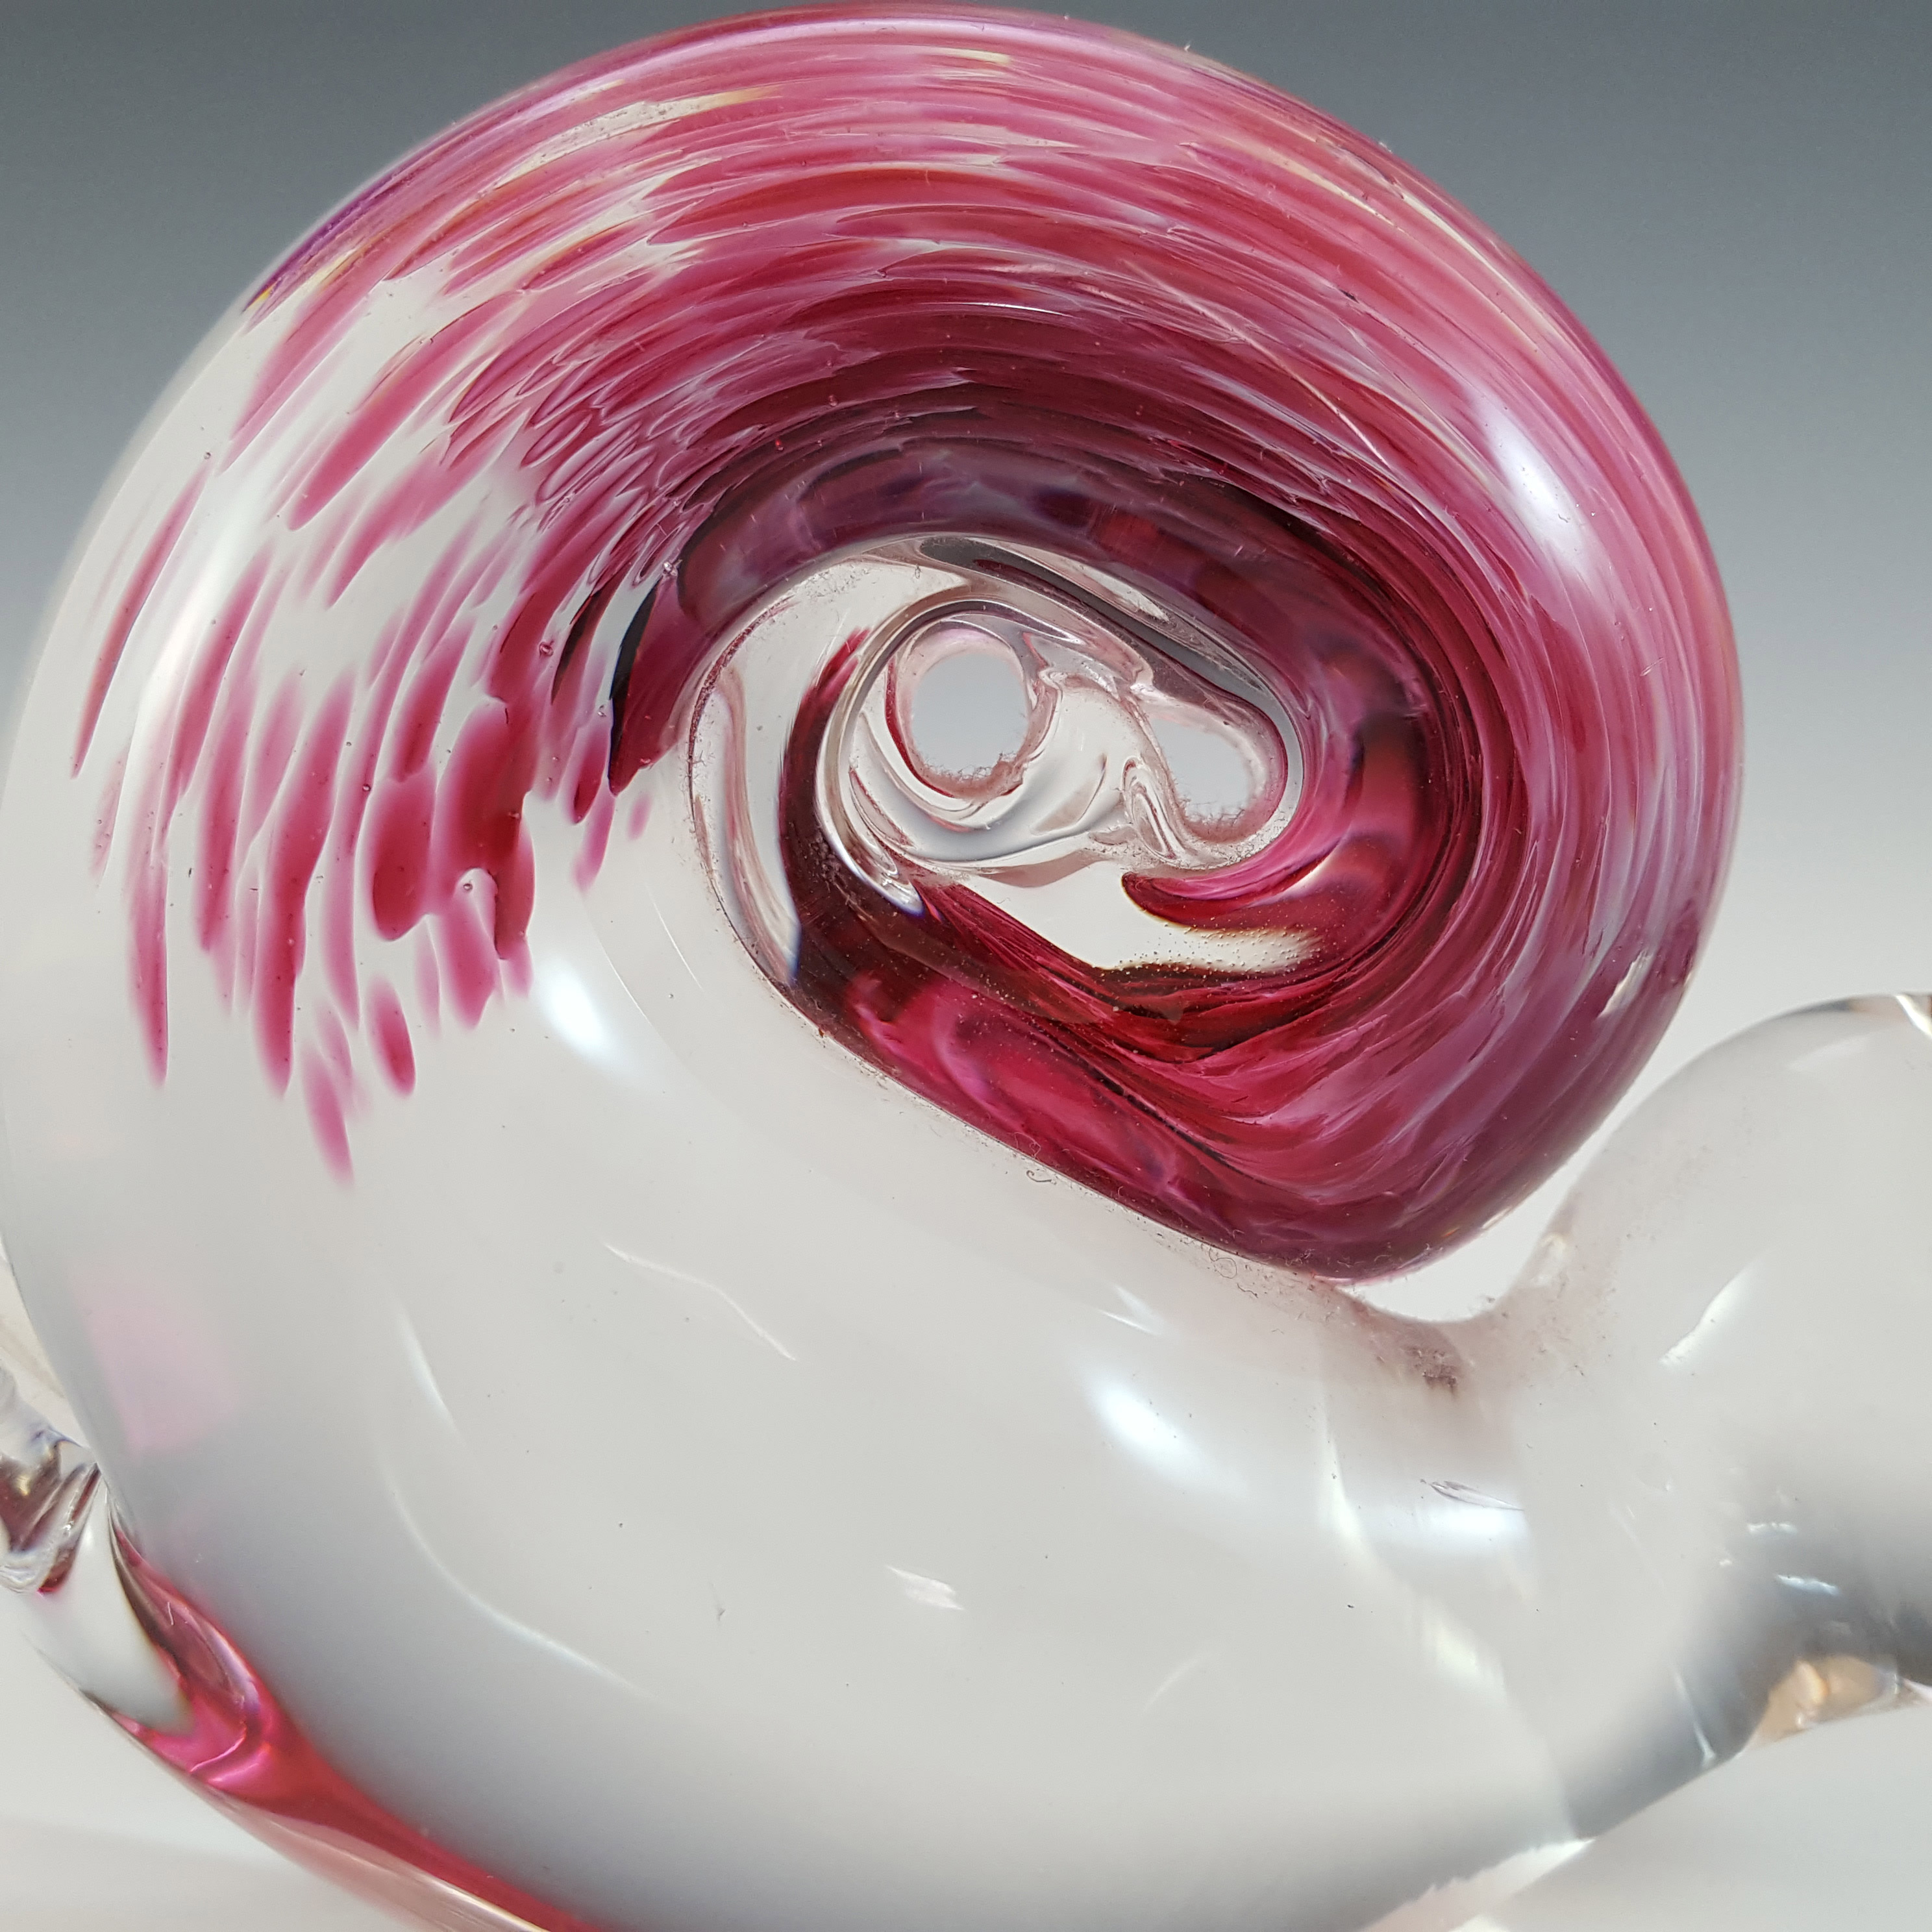 MARKED Wedgwood Speckled Pink Glass Snail Paperweight - Click Image to Close